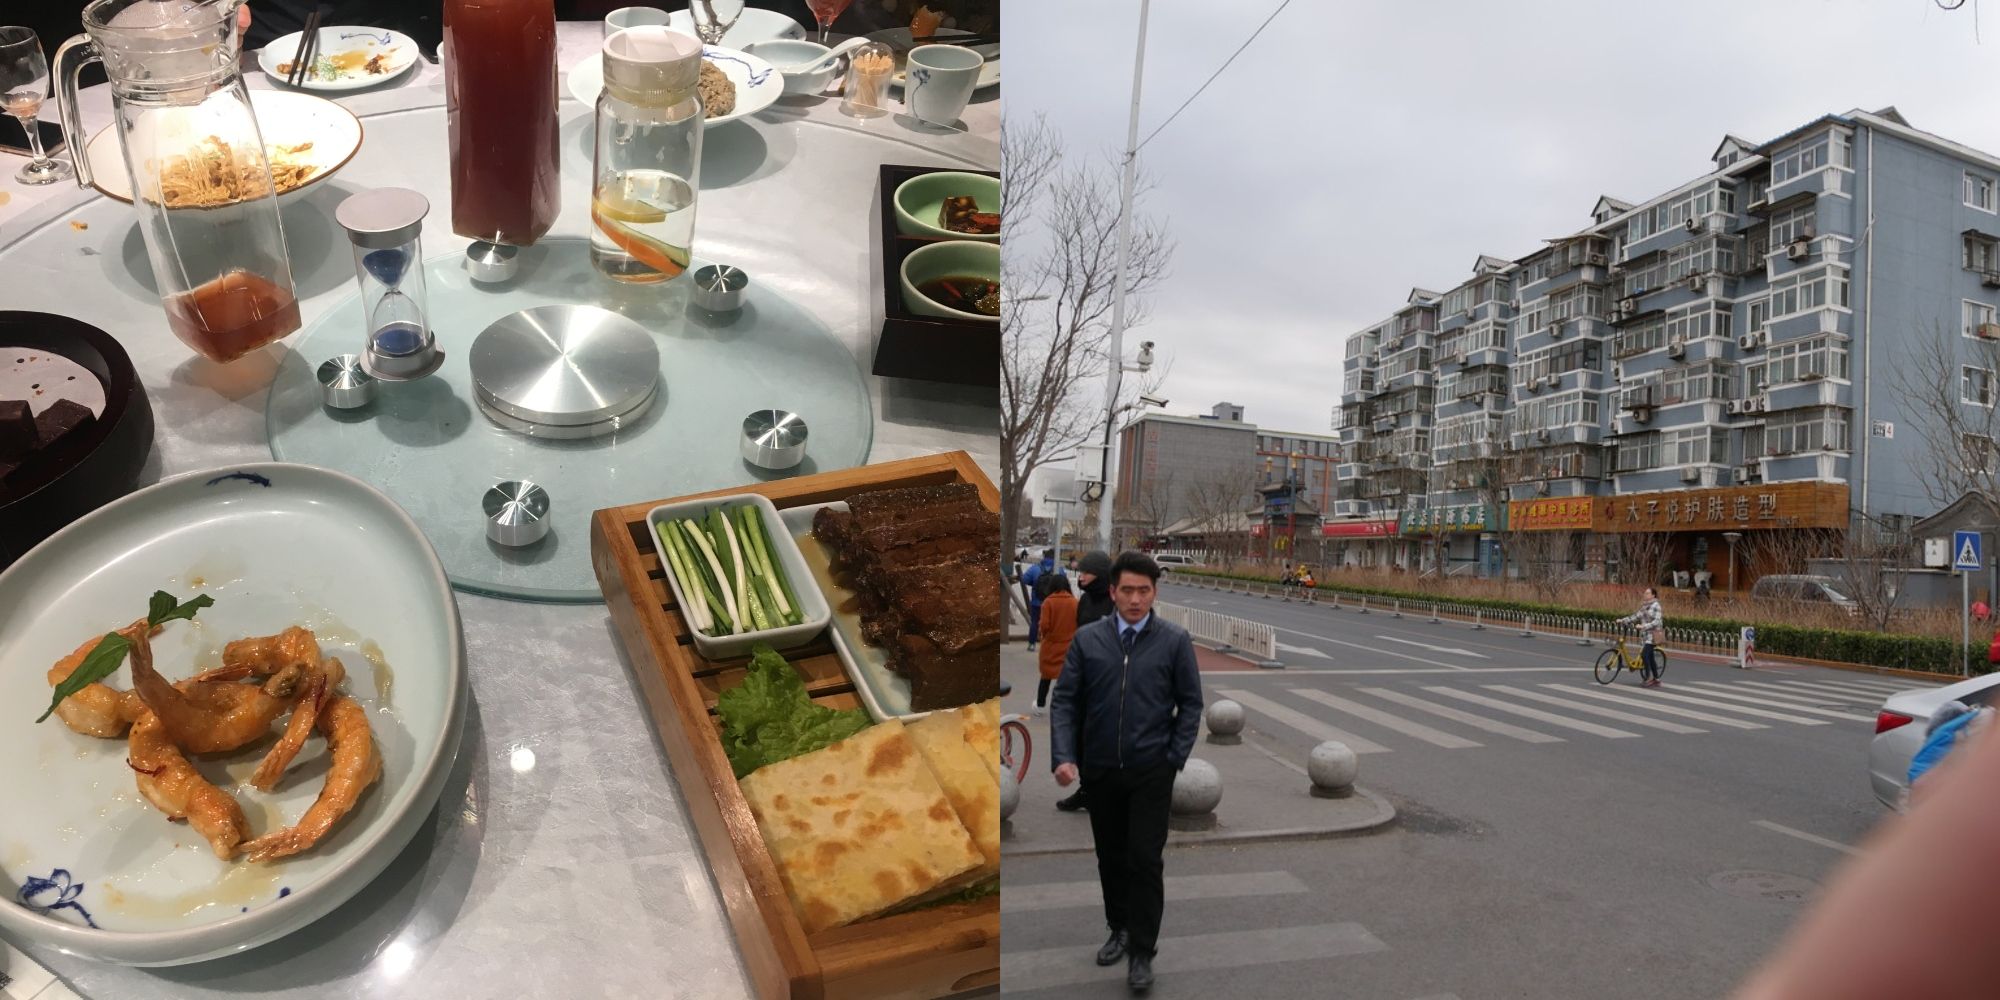 food on table and street in beijing china